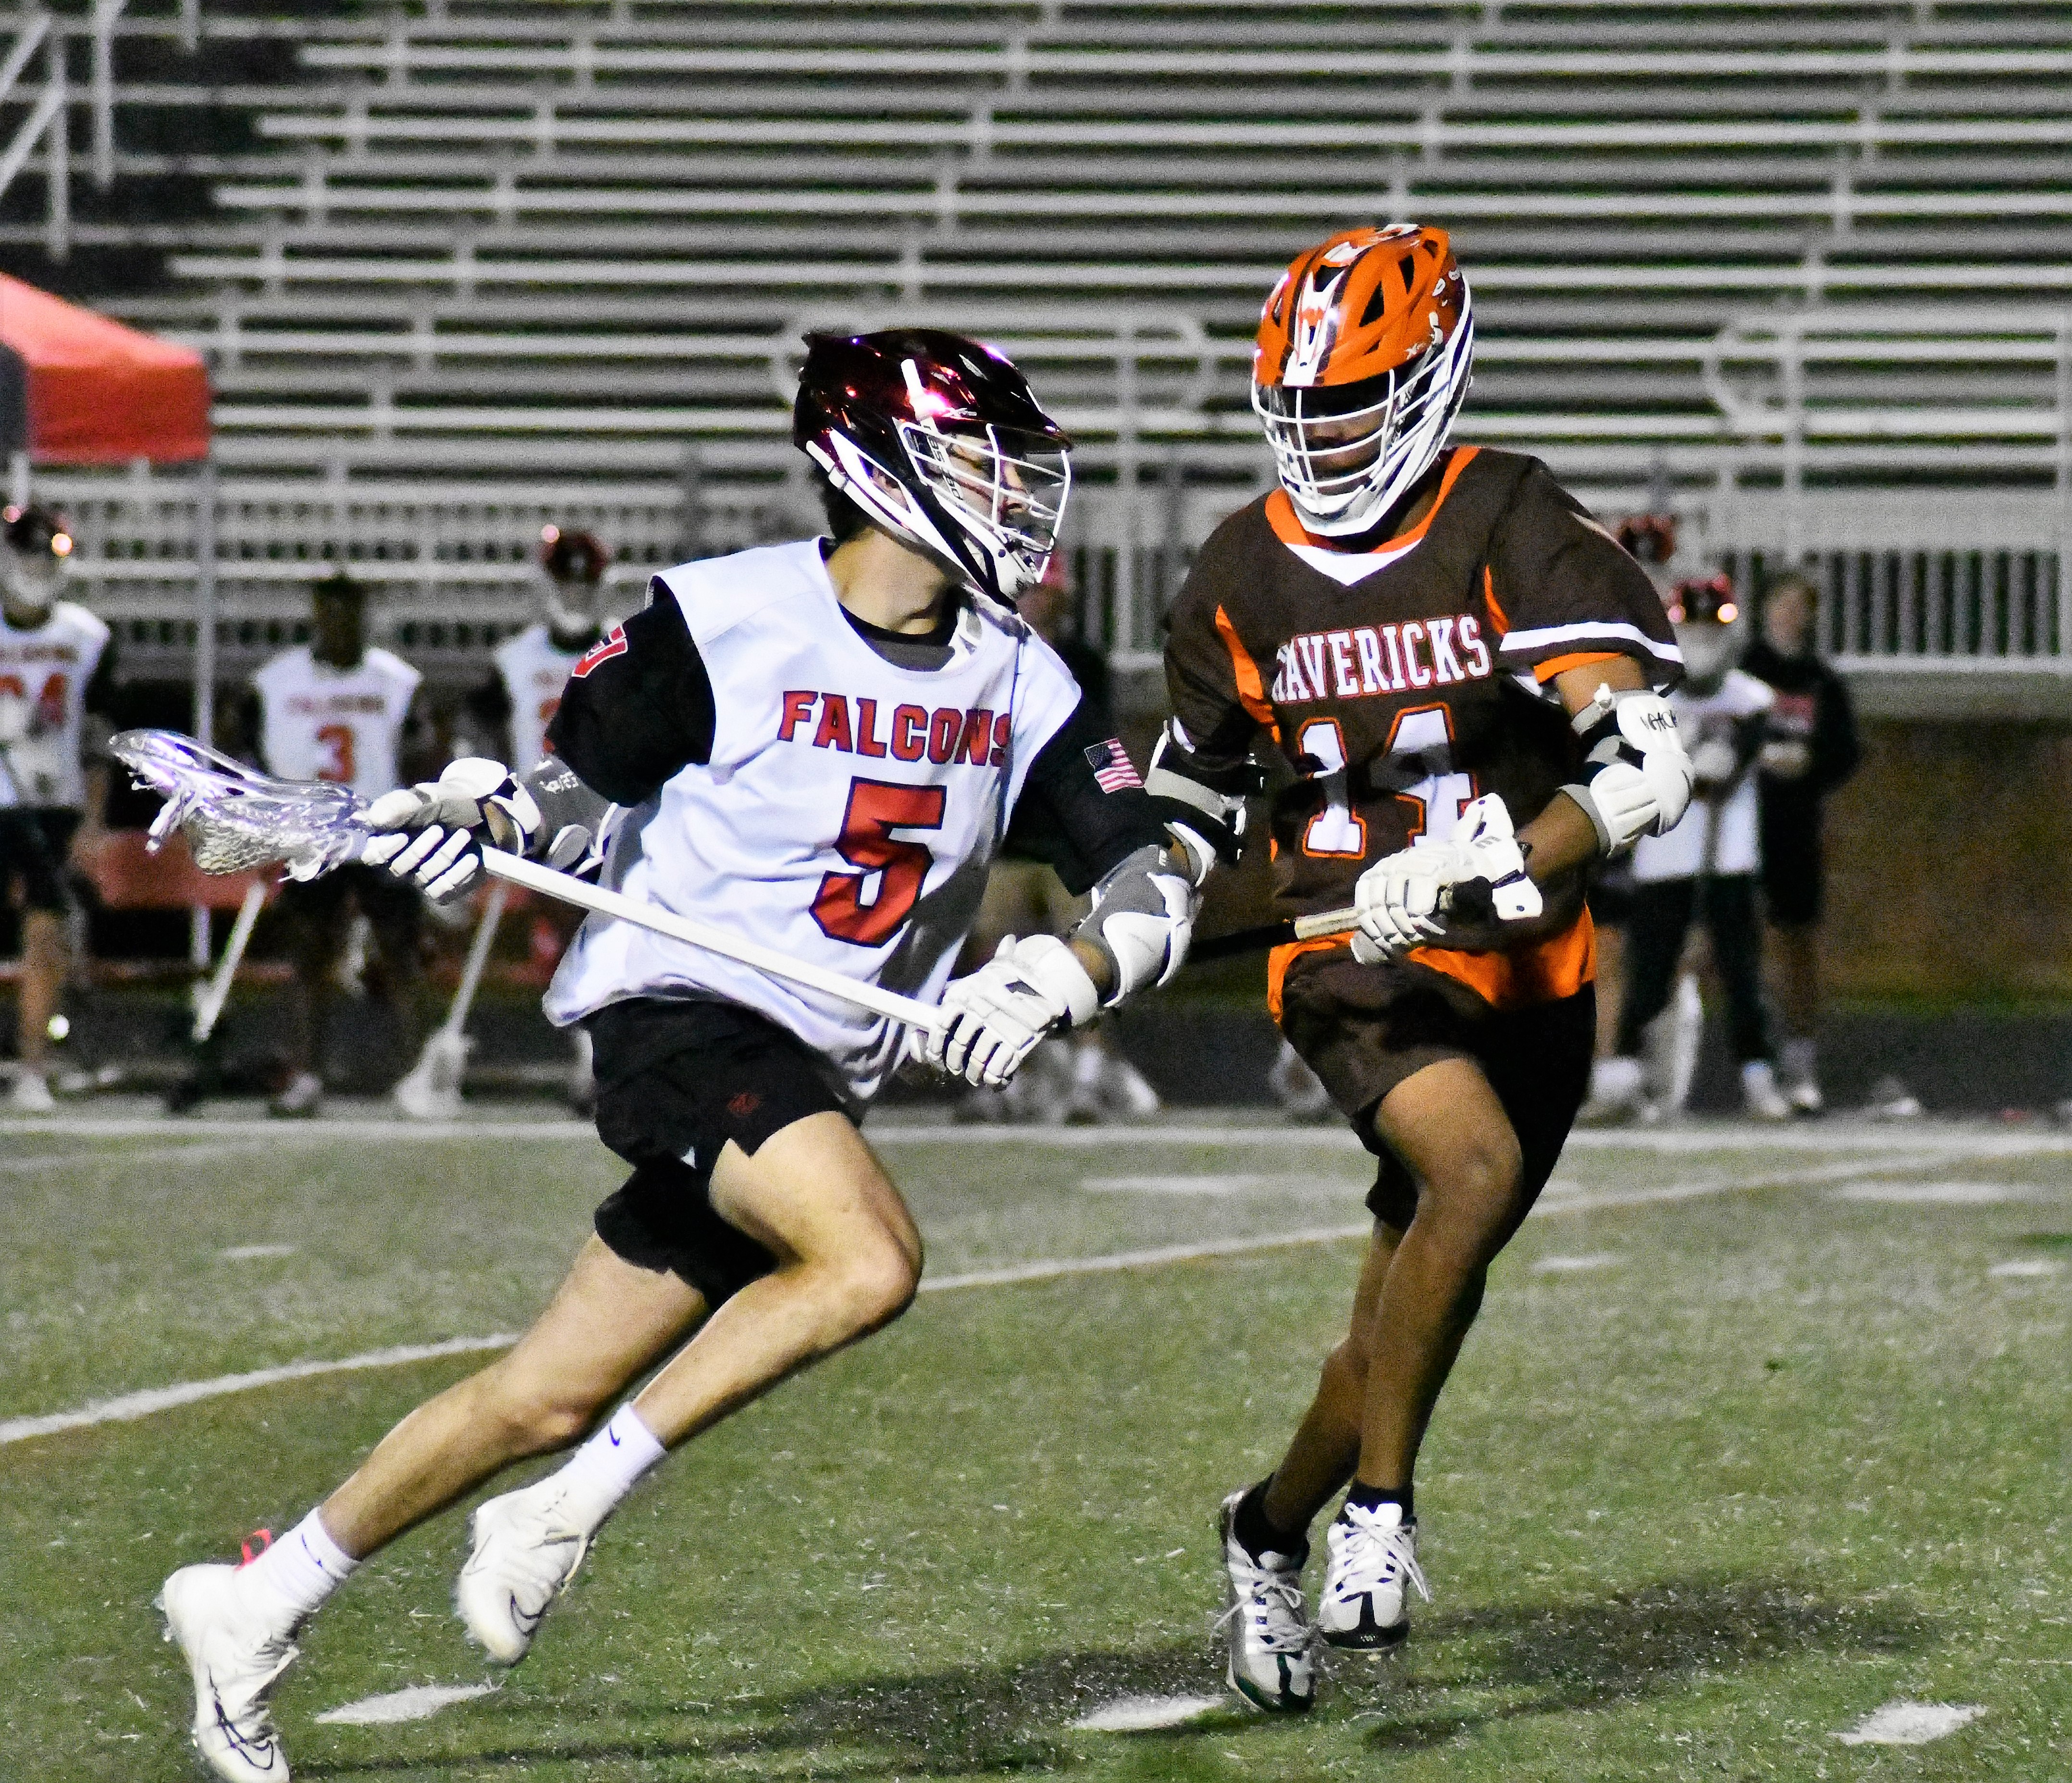 Nation Ford moves on in lacrosse playoffs with first round win (April 18th Roundup)